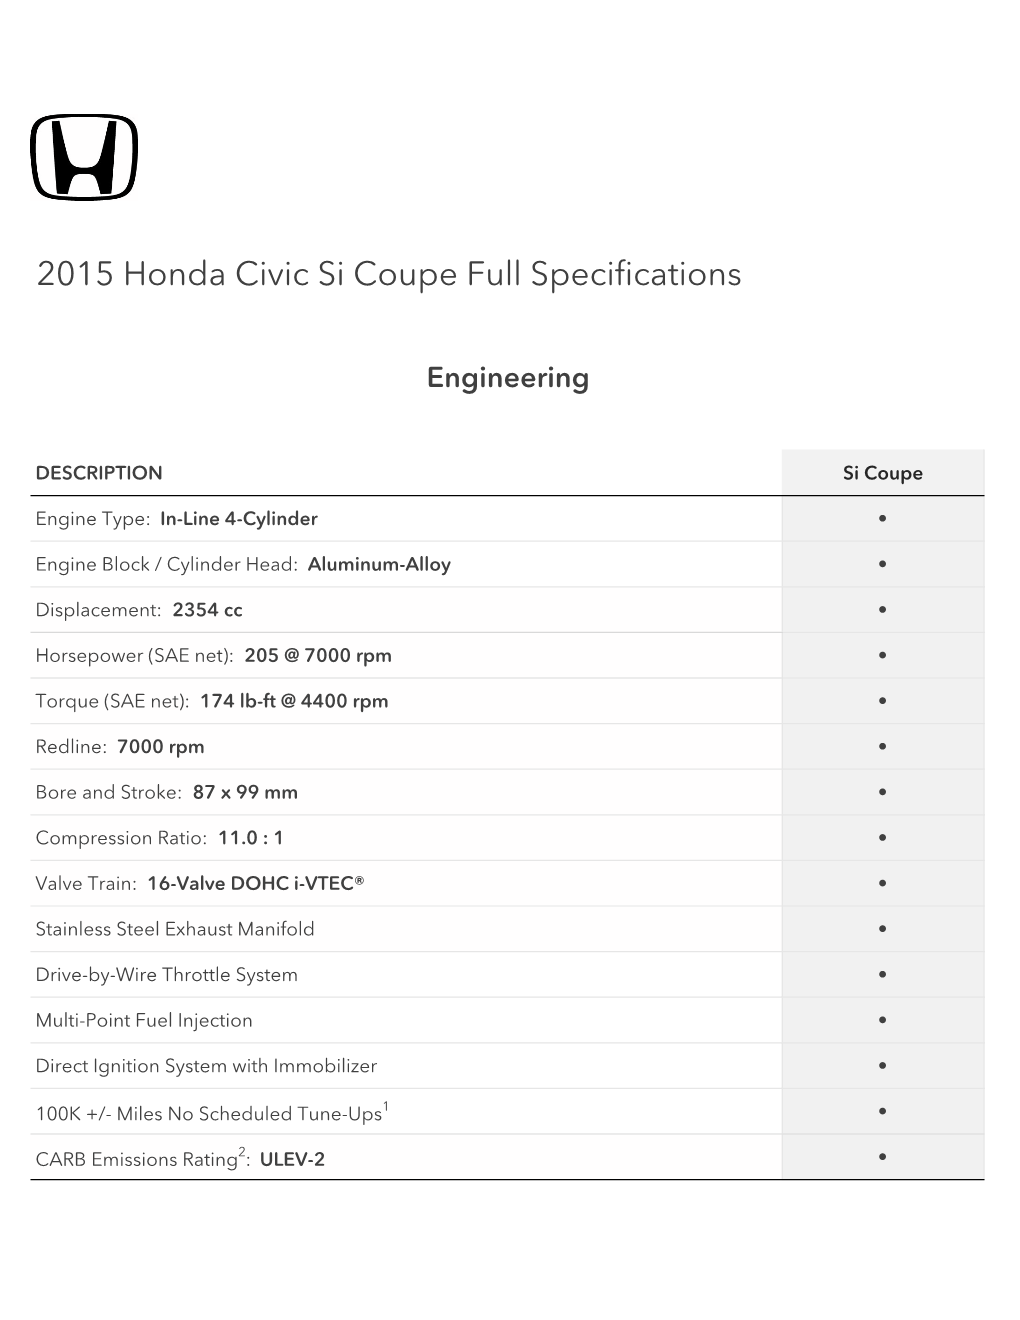 2015 Honda Civic Si Coupe Full Specifications